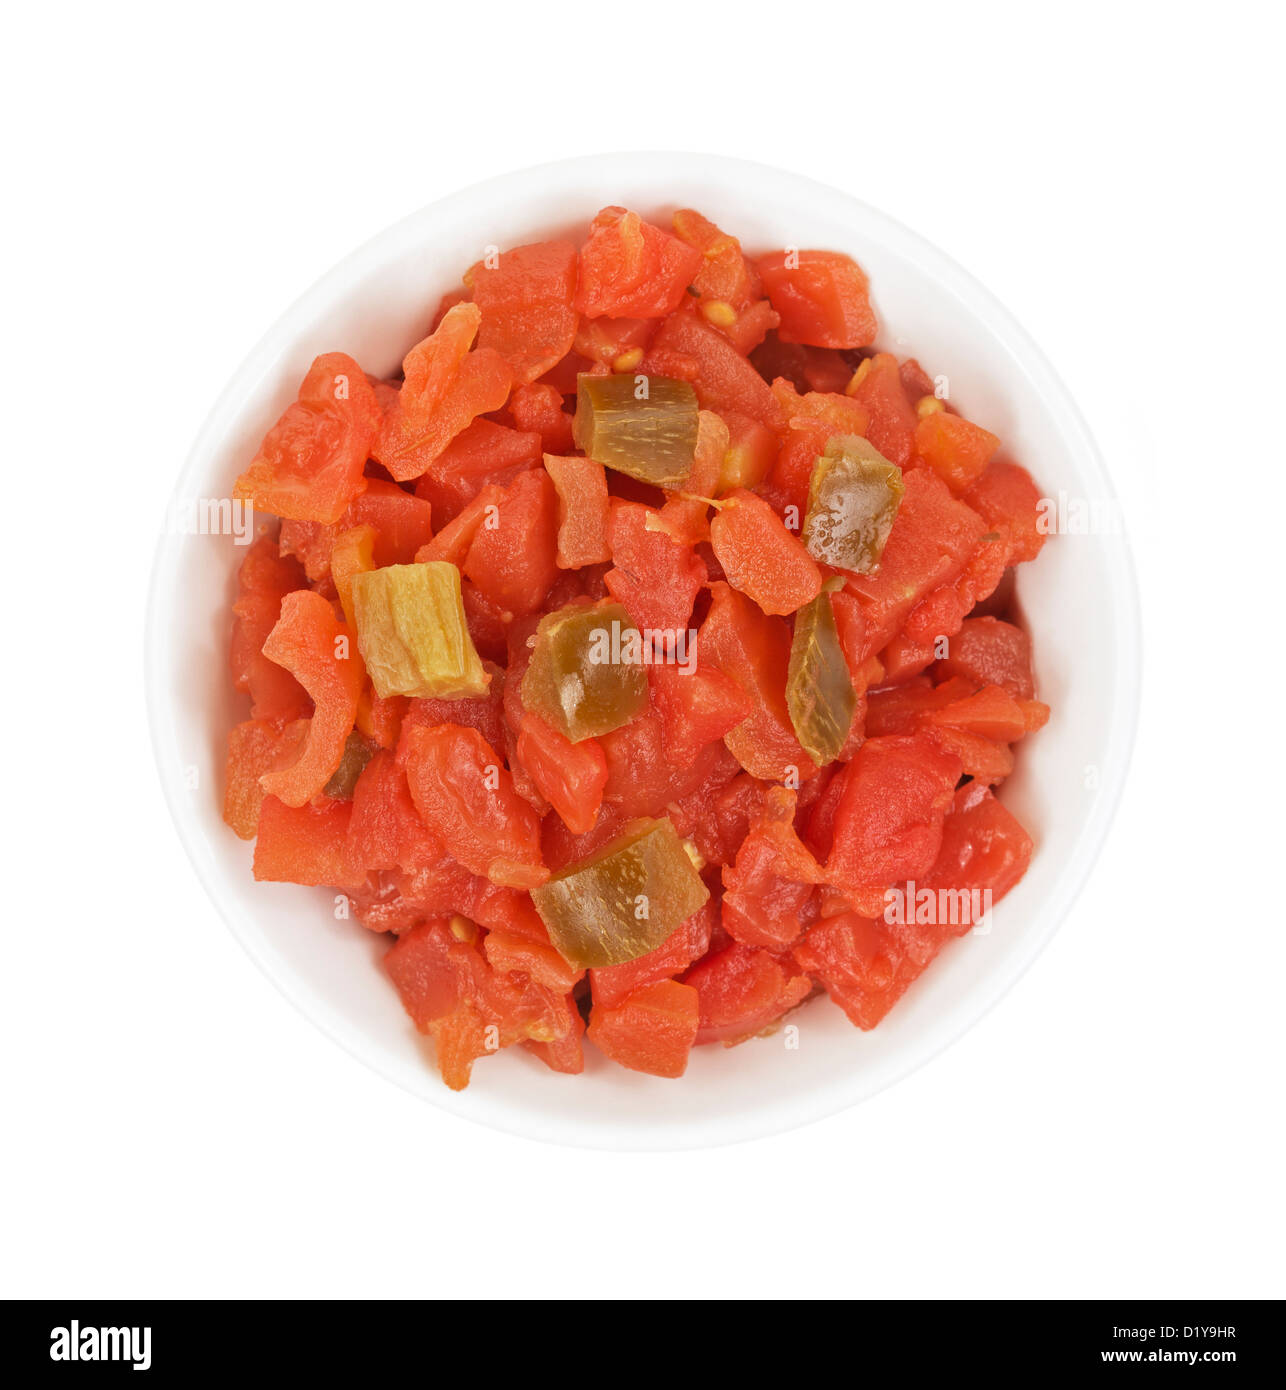 Top view of a small bowl filled with diced tomatoes topped with green peppers on a white background. Stock Photo